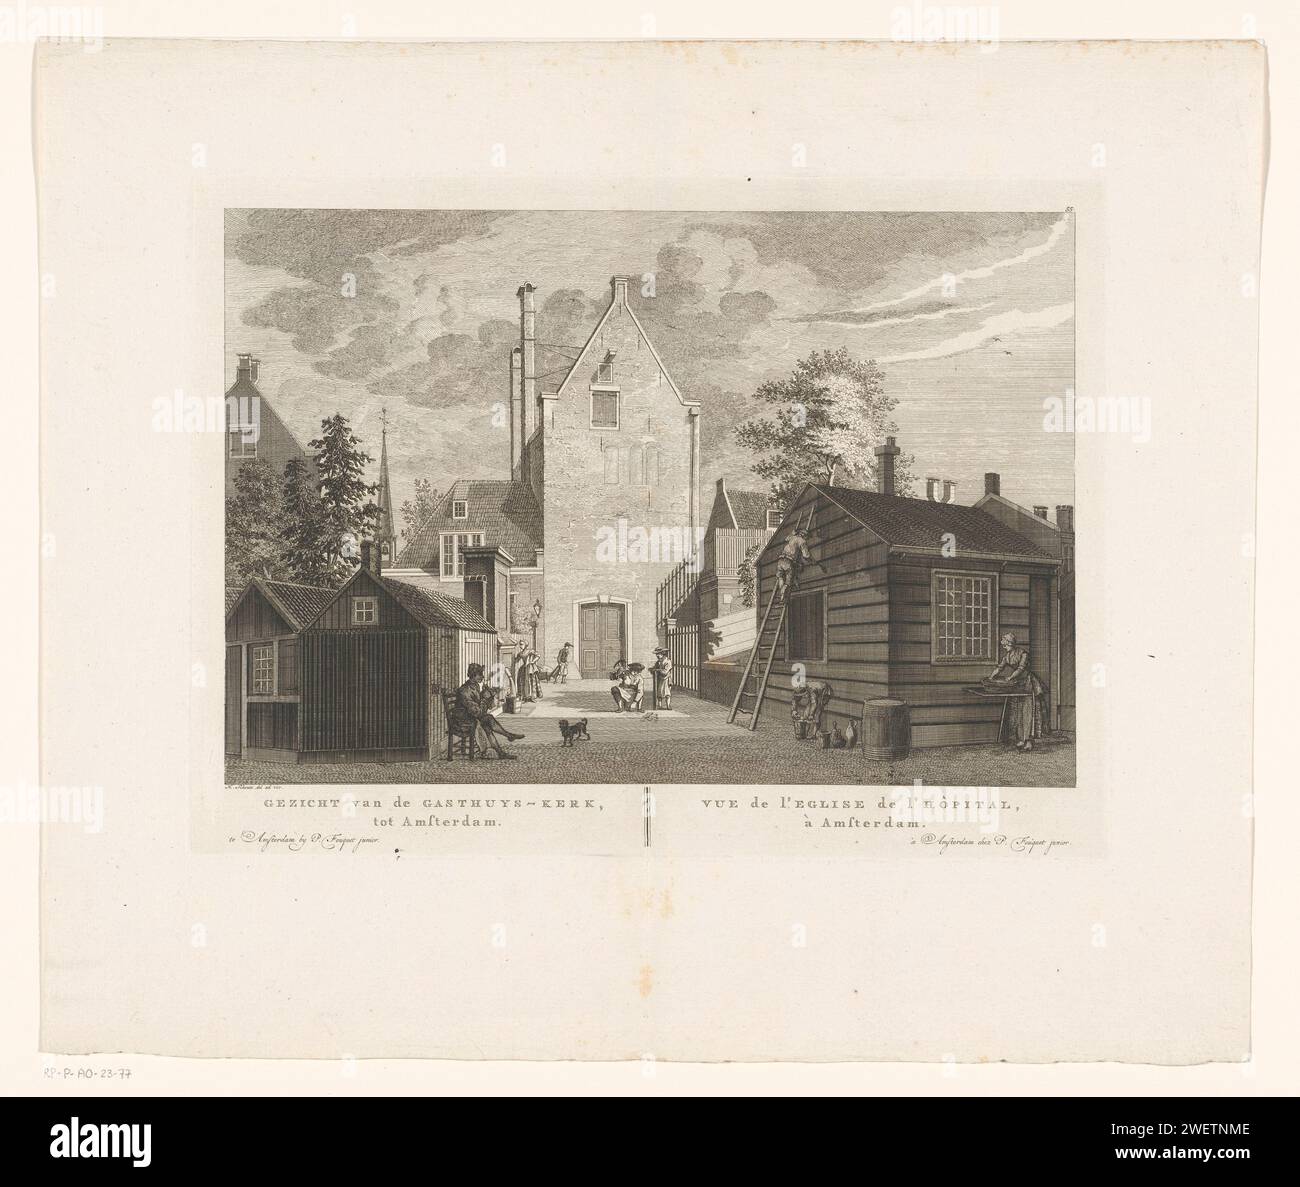 View of the Gasthuiskerk in Amsterdam, Hermanus Petrus Schouten (Possible), After Hermanus Petrus Schouten, c. 1770 - 1783 print View of the Gasthuiskerk on the Gasthuishof on the Oude Turfmarkt in Amsterdam. Different figures on the street. On the right a man is smoking pipe, behind it a woman gets water. In the middle, two men are busy laying stones. On the right two men are busy with paintwork and a woman does the laundry. Under the show the title in Dutch and French. Numbered at the top right: 55.  paper etching / engraving church (exterior) - QQ - small church, chapel. street (+ city(-sca Stock Photo